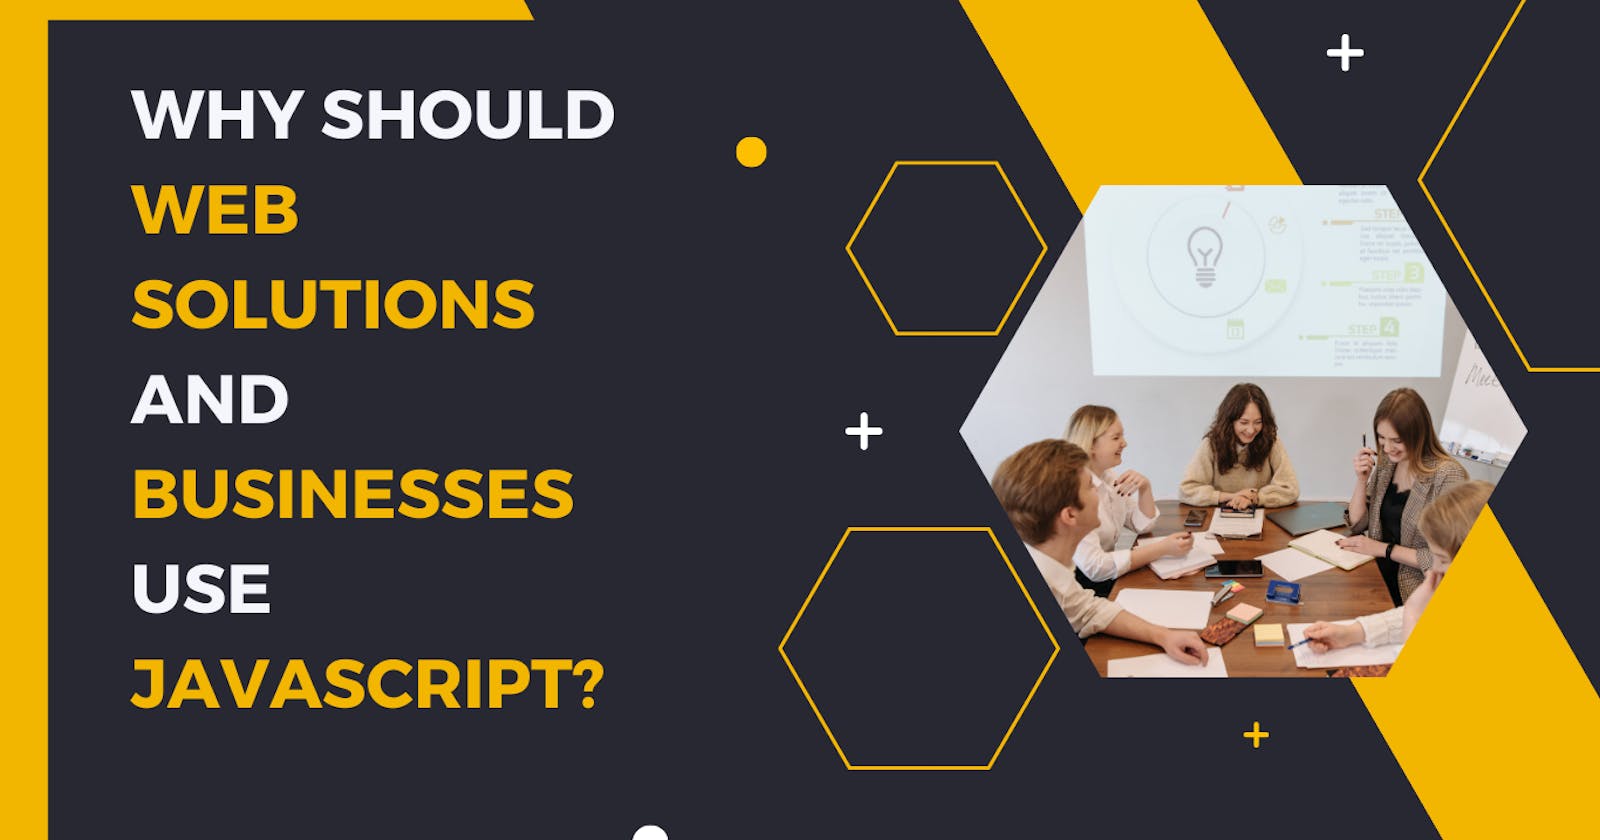 Why Should Web Solutions And Businesses Use JavaScript?